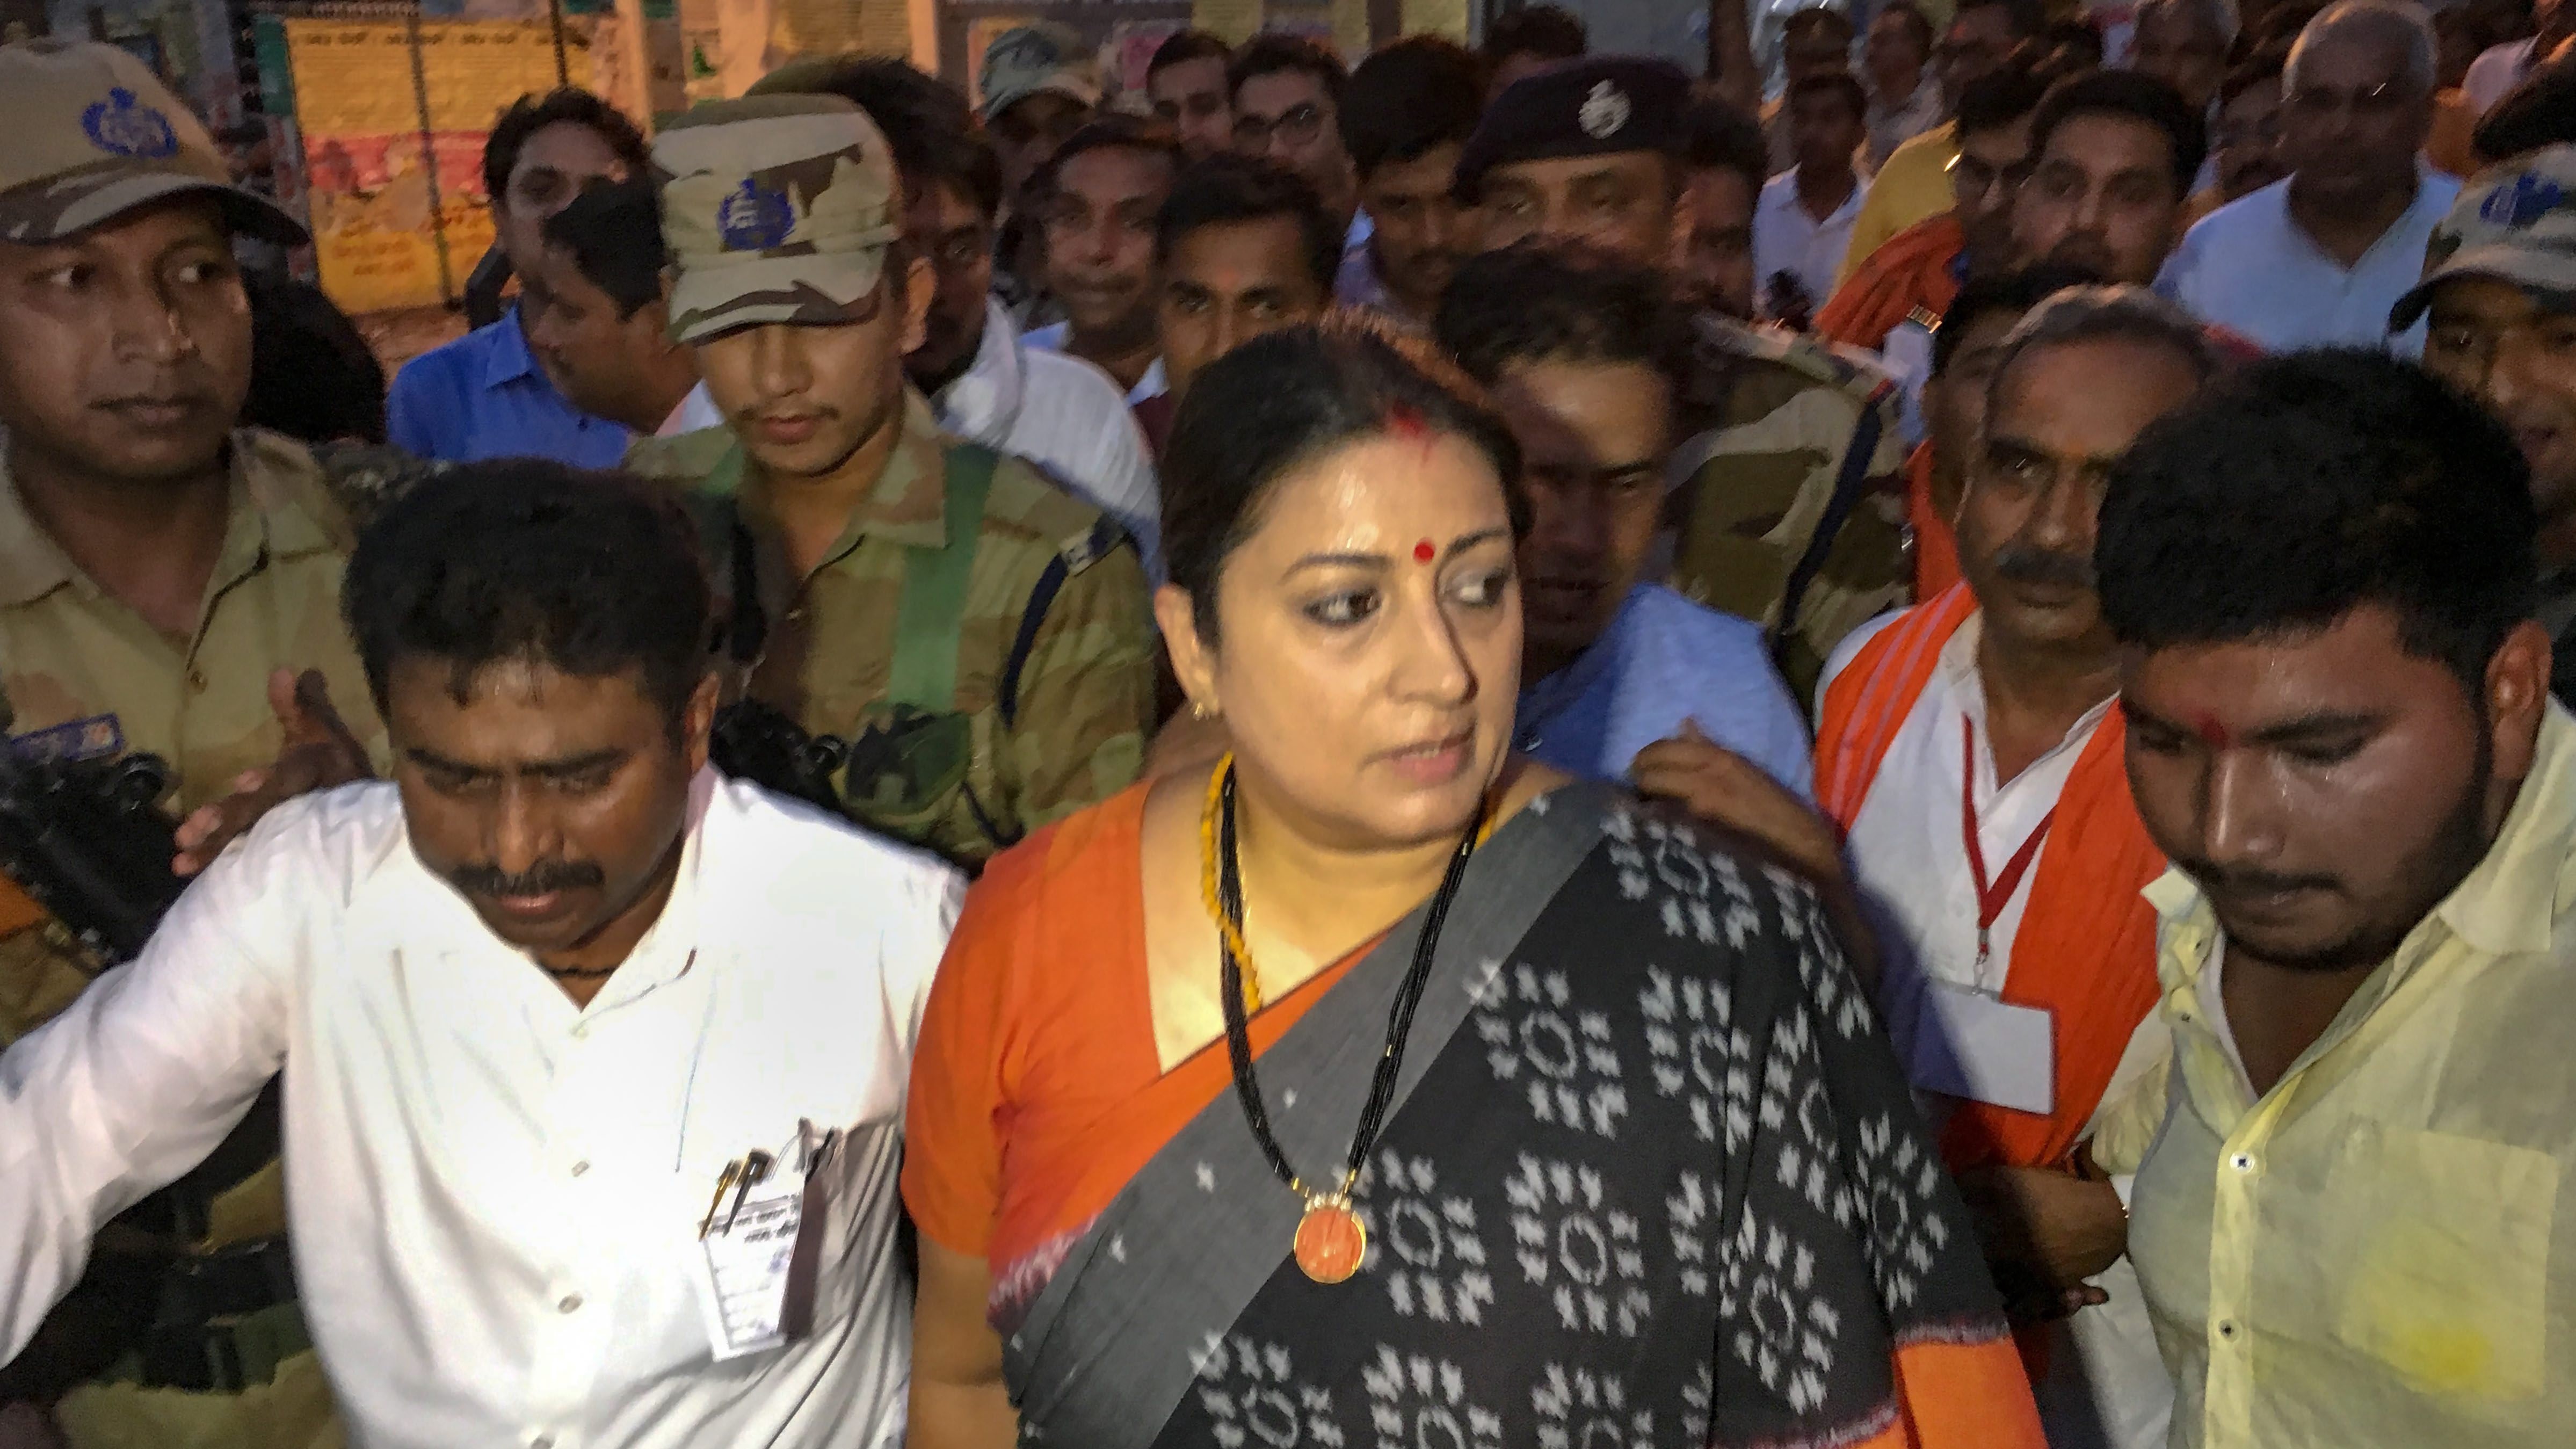 Smriti Irani, Union minister and the BJP's candidate from Amethi, at a counting centre for the 2019 Lok Sabha elections, in Amethi, on Thursday, May 23